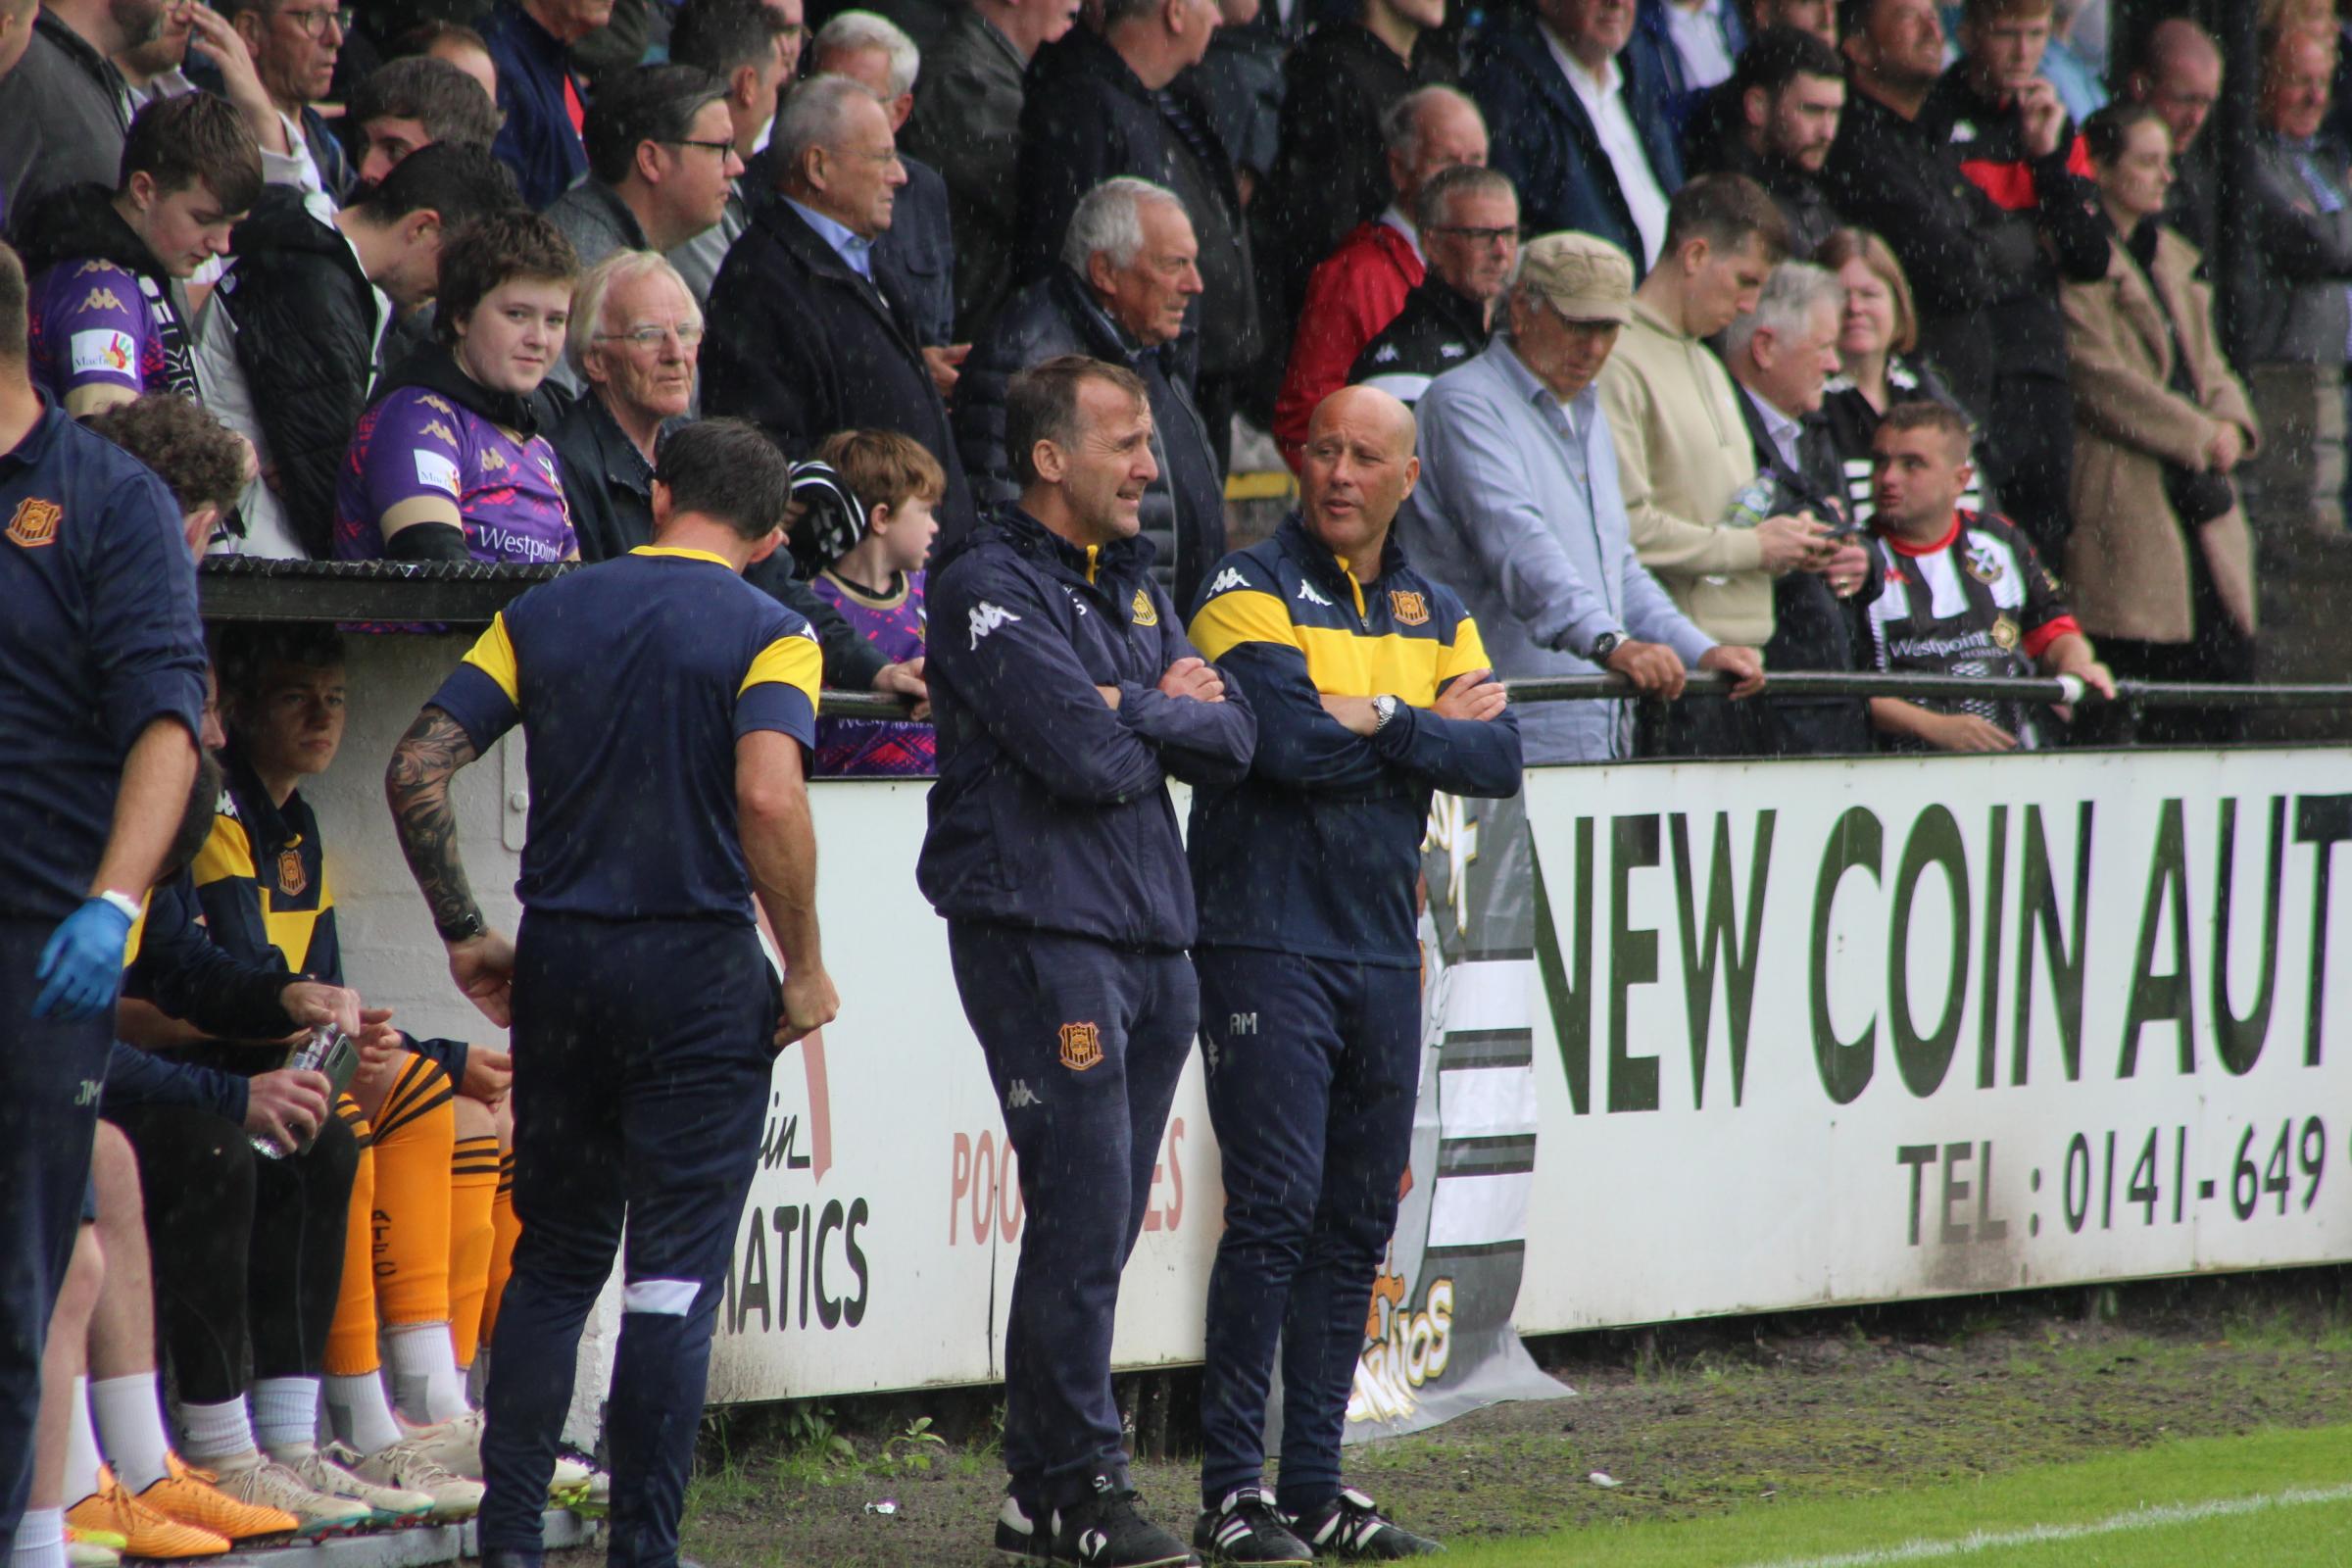 Talbot boss Tommy Sloan and assistant Allan McLuckie deep in conversation at Newlandsfield